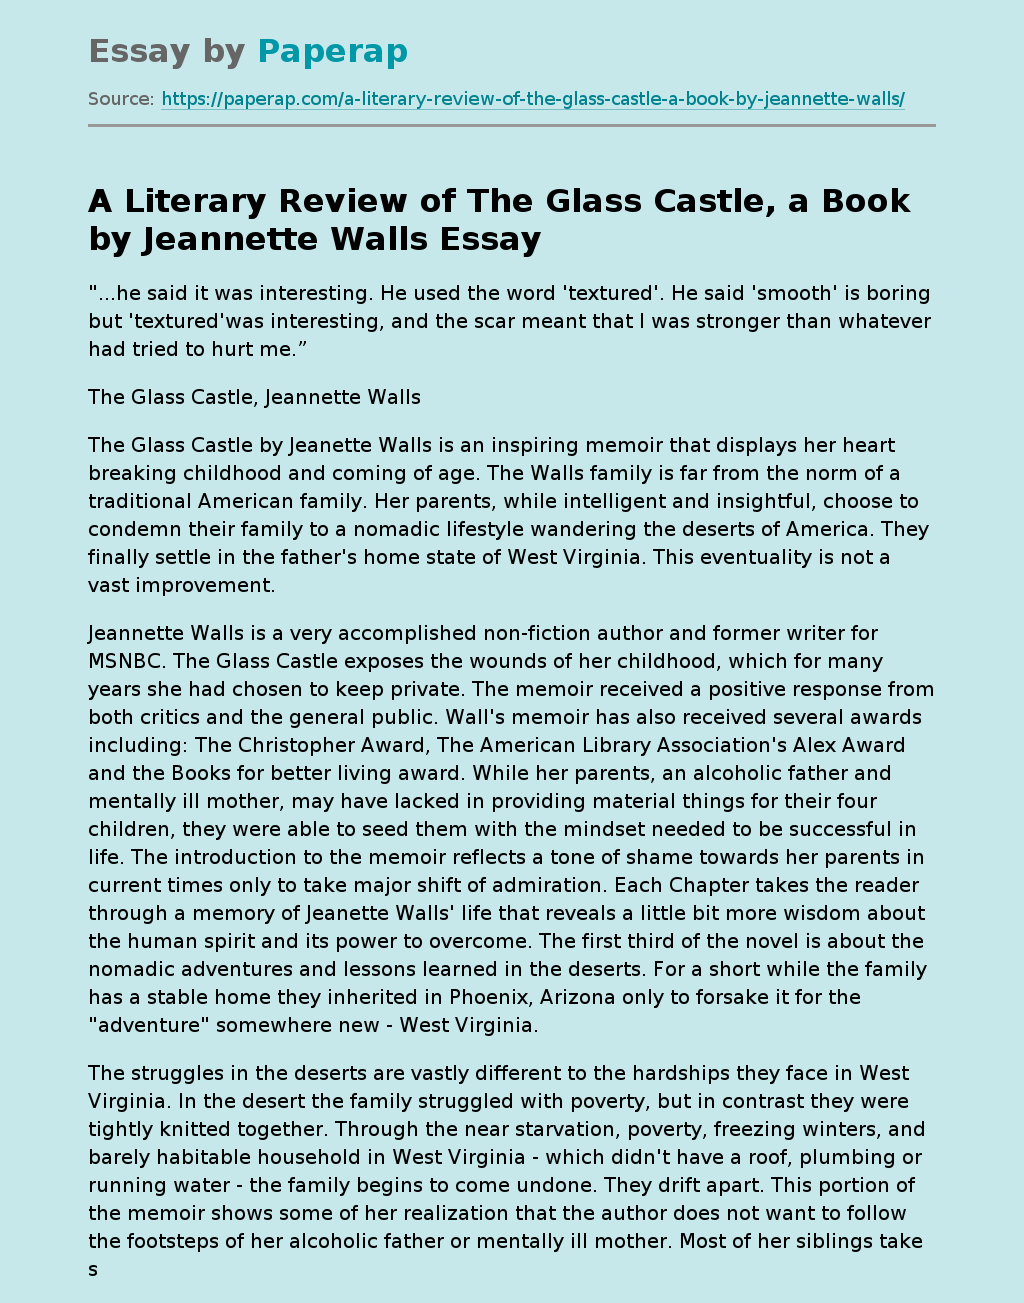 A Literary Review of The Glass Castle, a Book by Jeannette Walls